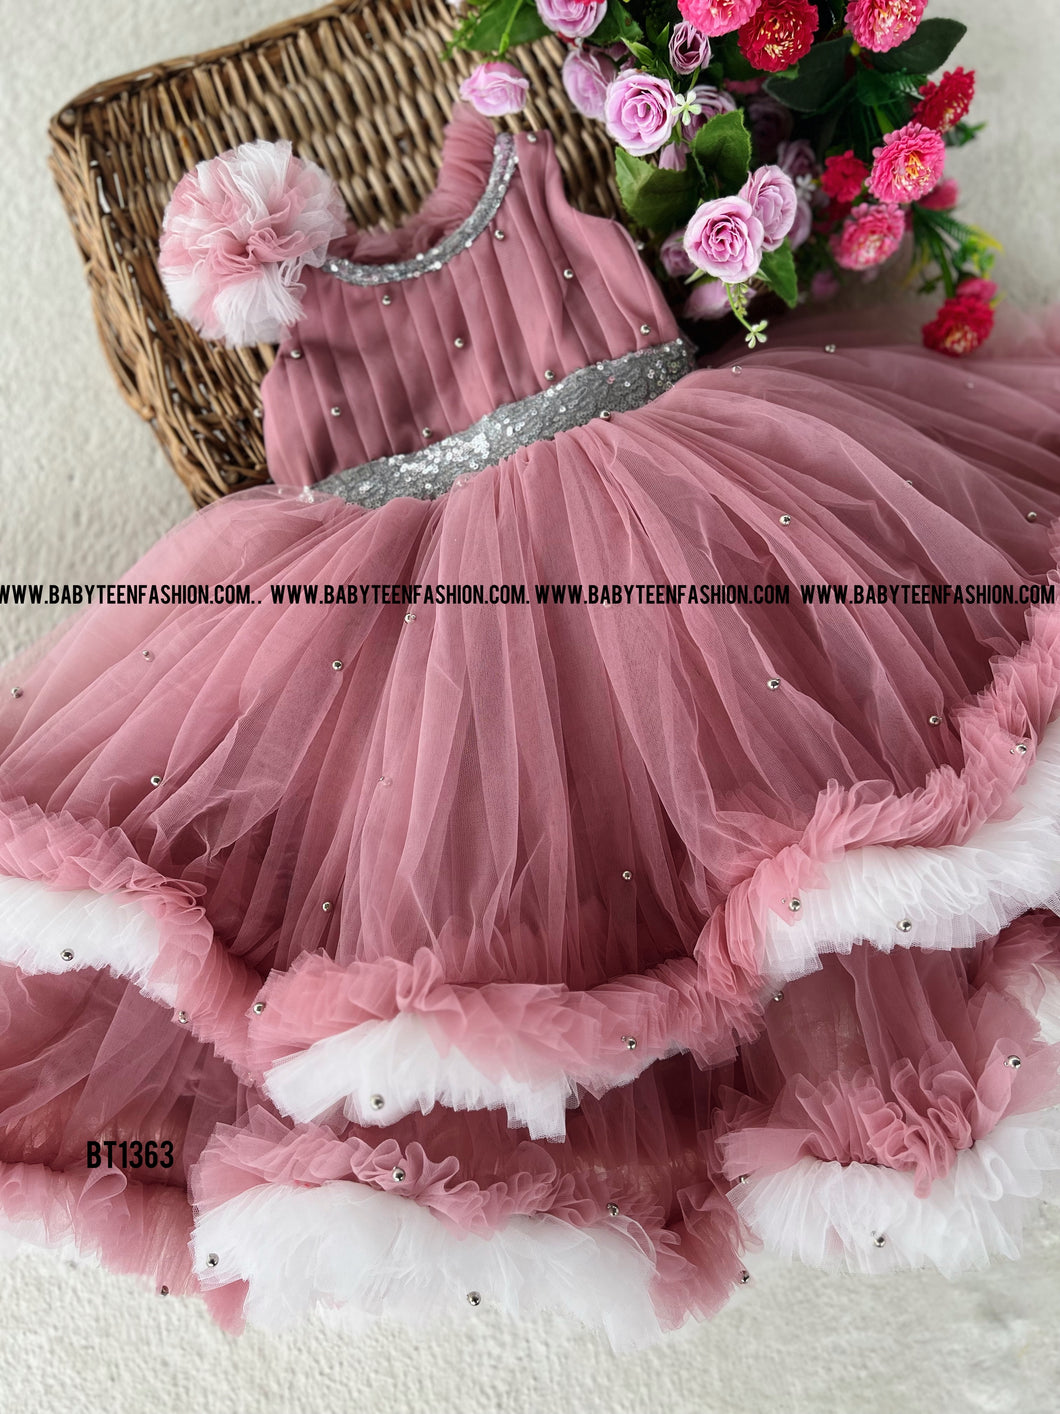 BT1363 Charming Blush Blossom Gown - A Touch of Glamour